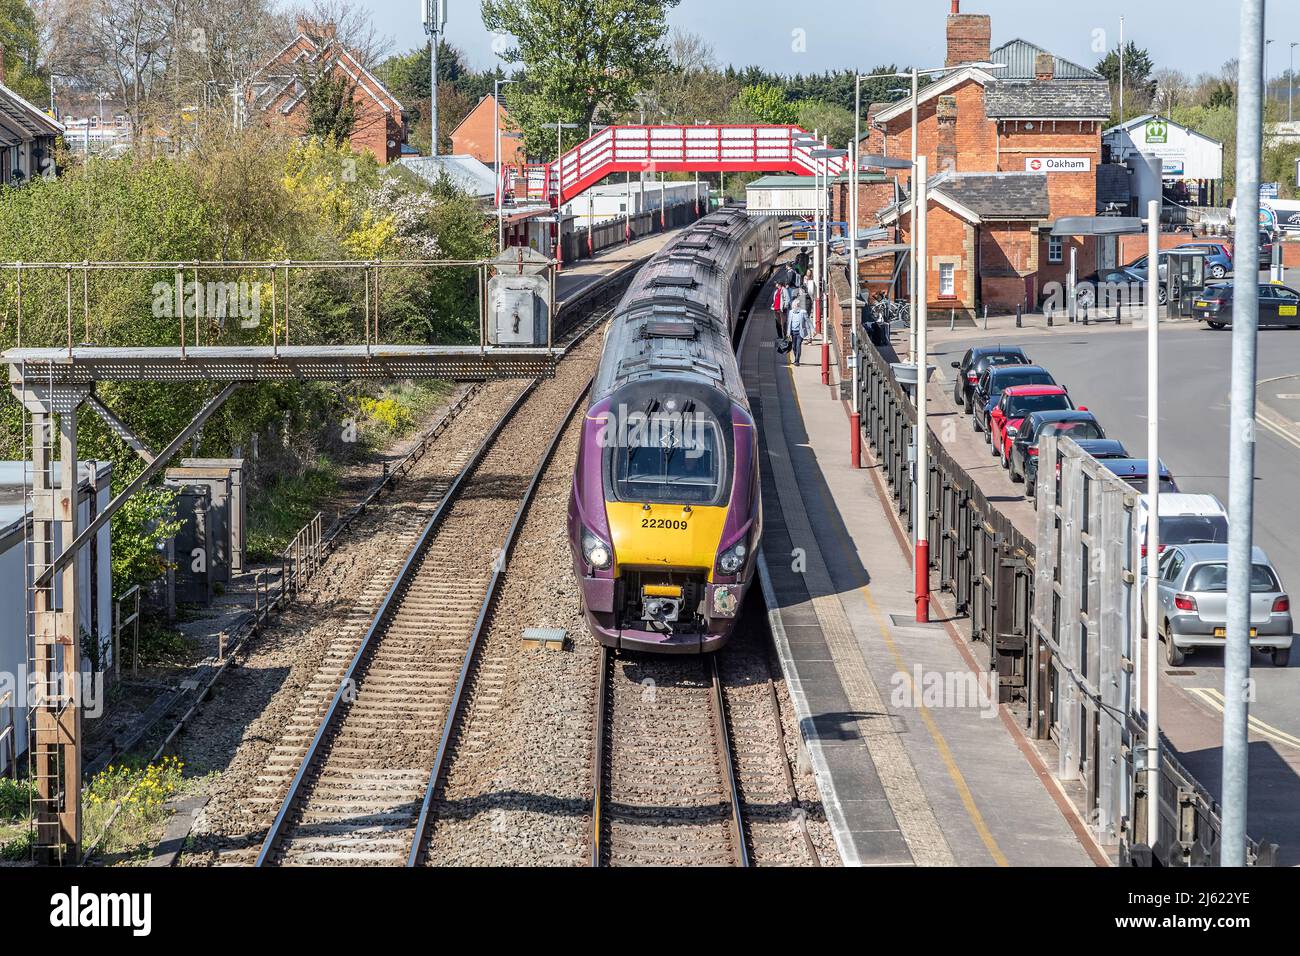 Diesel-electric passenger train leaving Oakham station, looking down from the foot bridge over then tracks, Rutland, Leicester, England, UK. Stock Photo